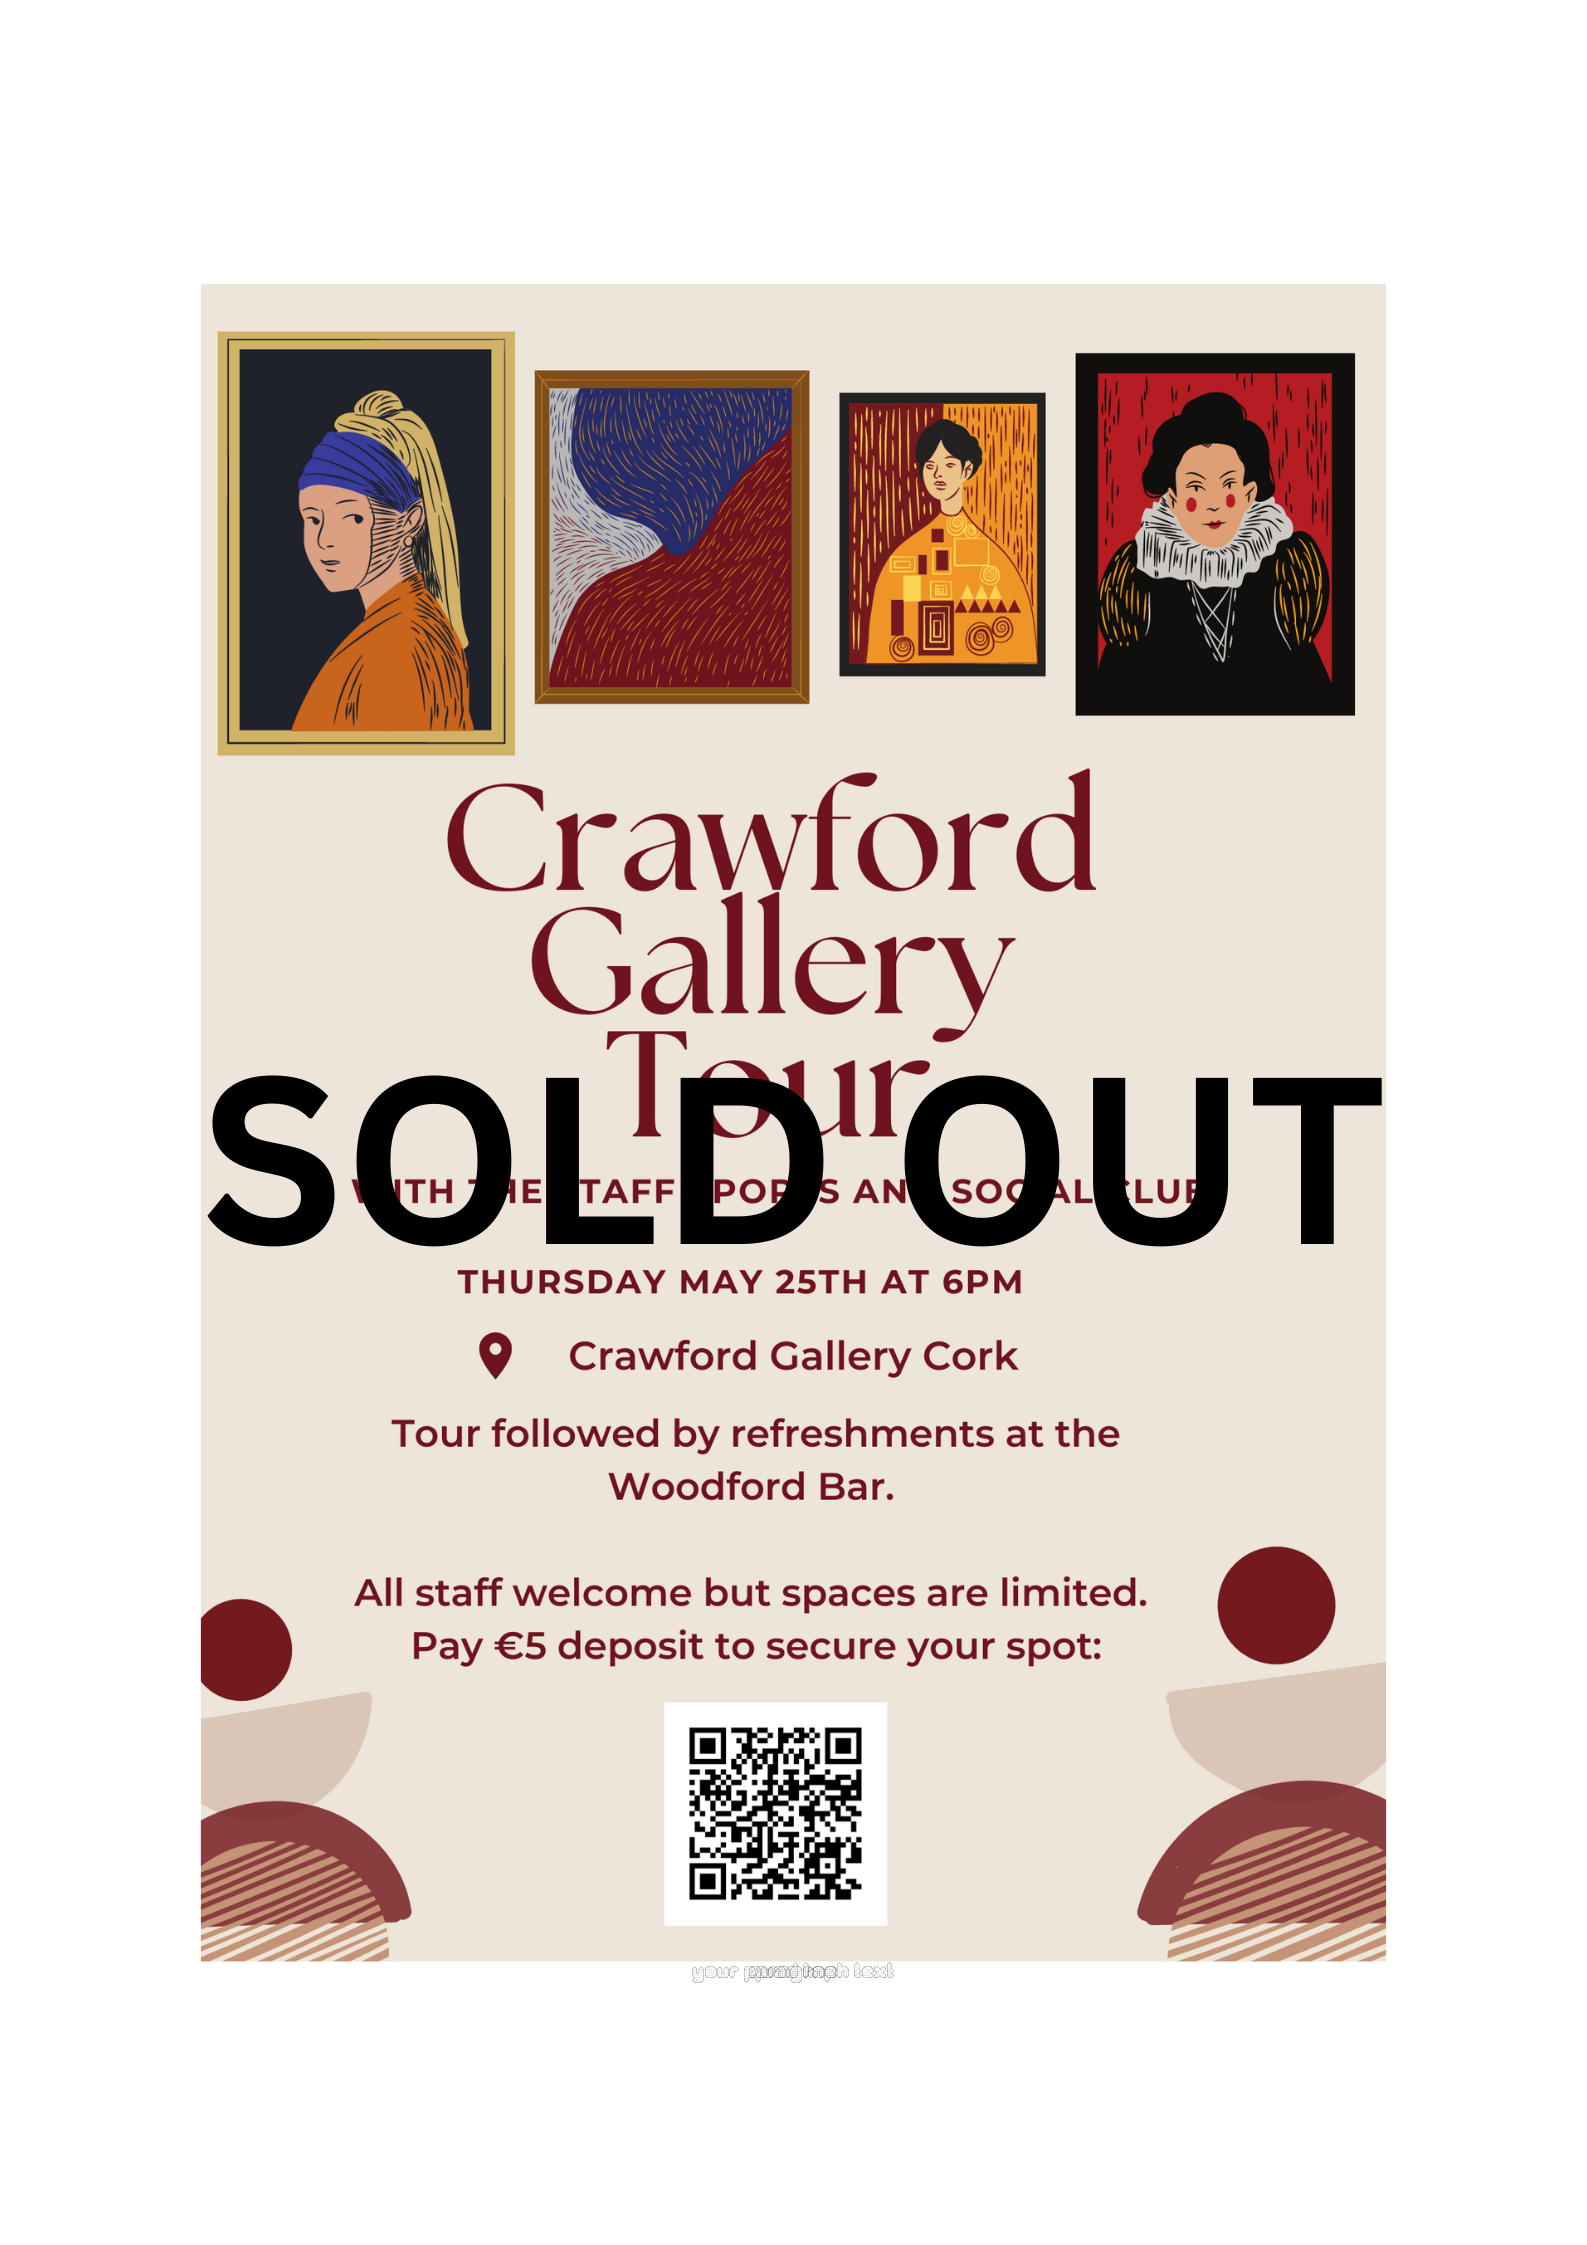 Crawford Gallery, event sold out.